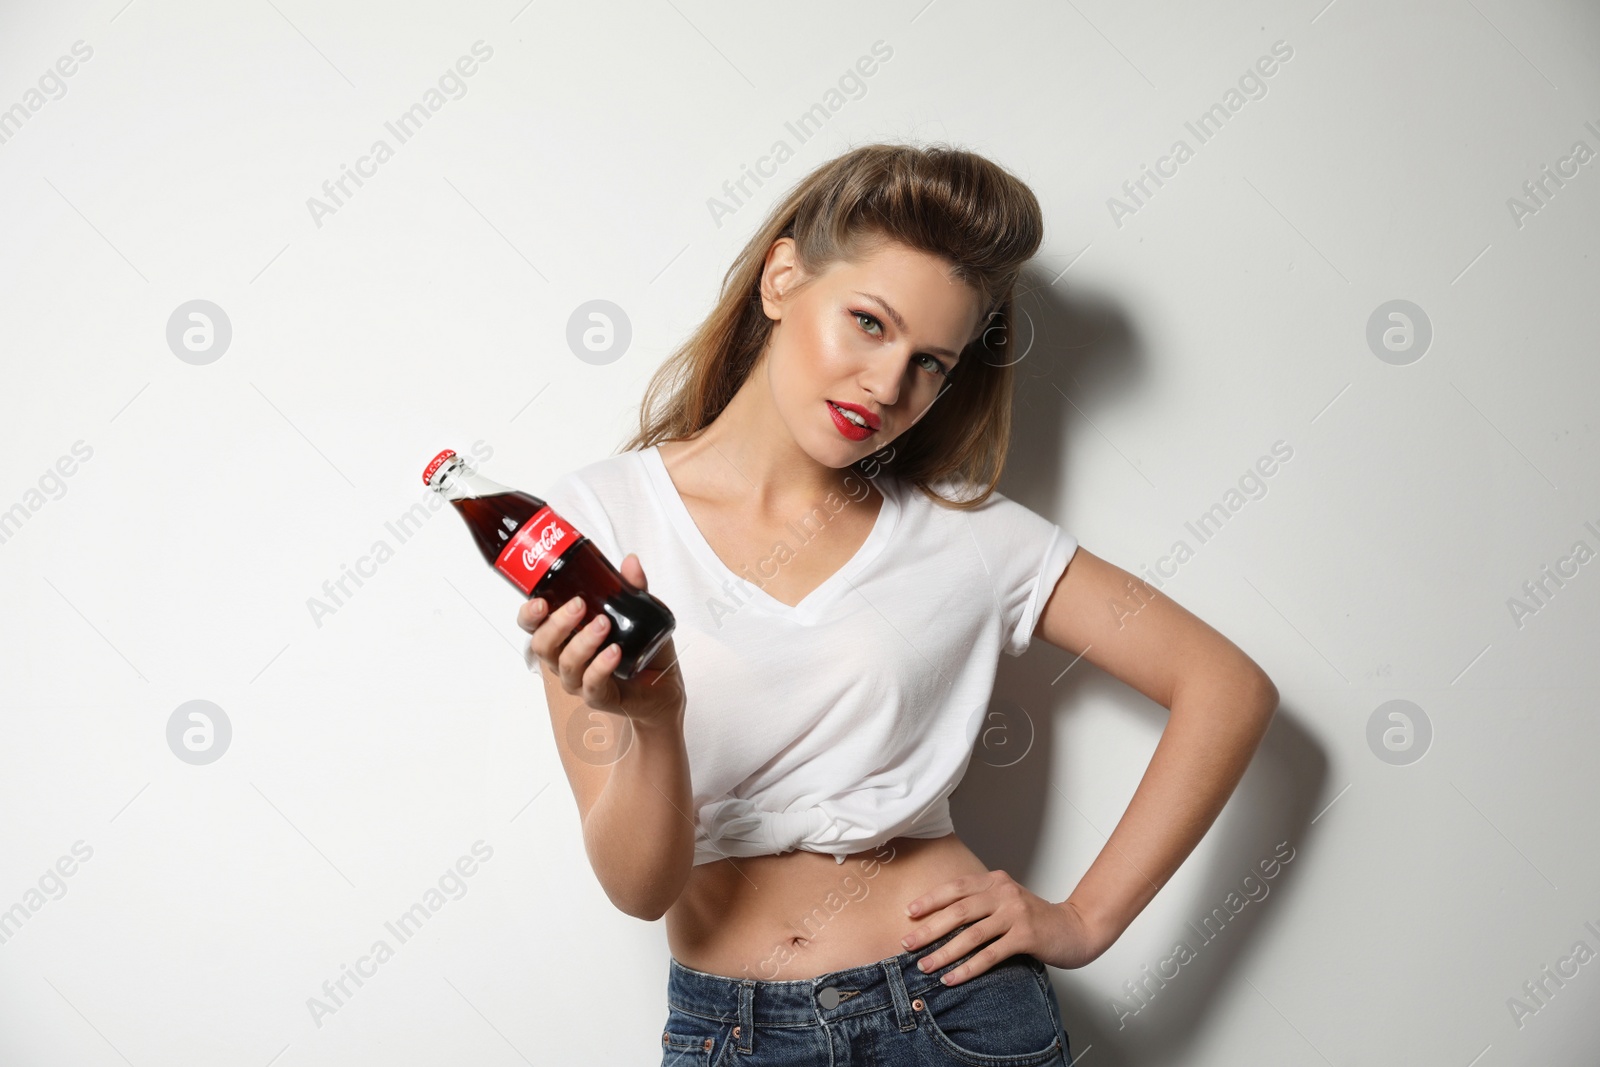 Photo of MYKOLAIV, UKRAINE - NOVEMBER 28, 2018: Young woman with bottle of Coca-Cola on white background